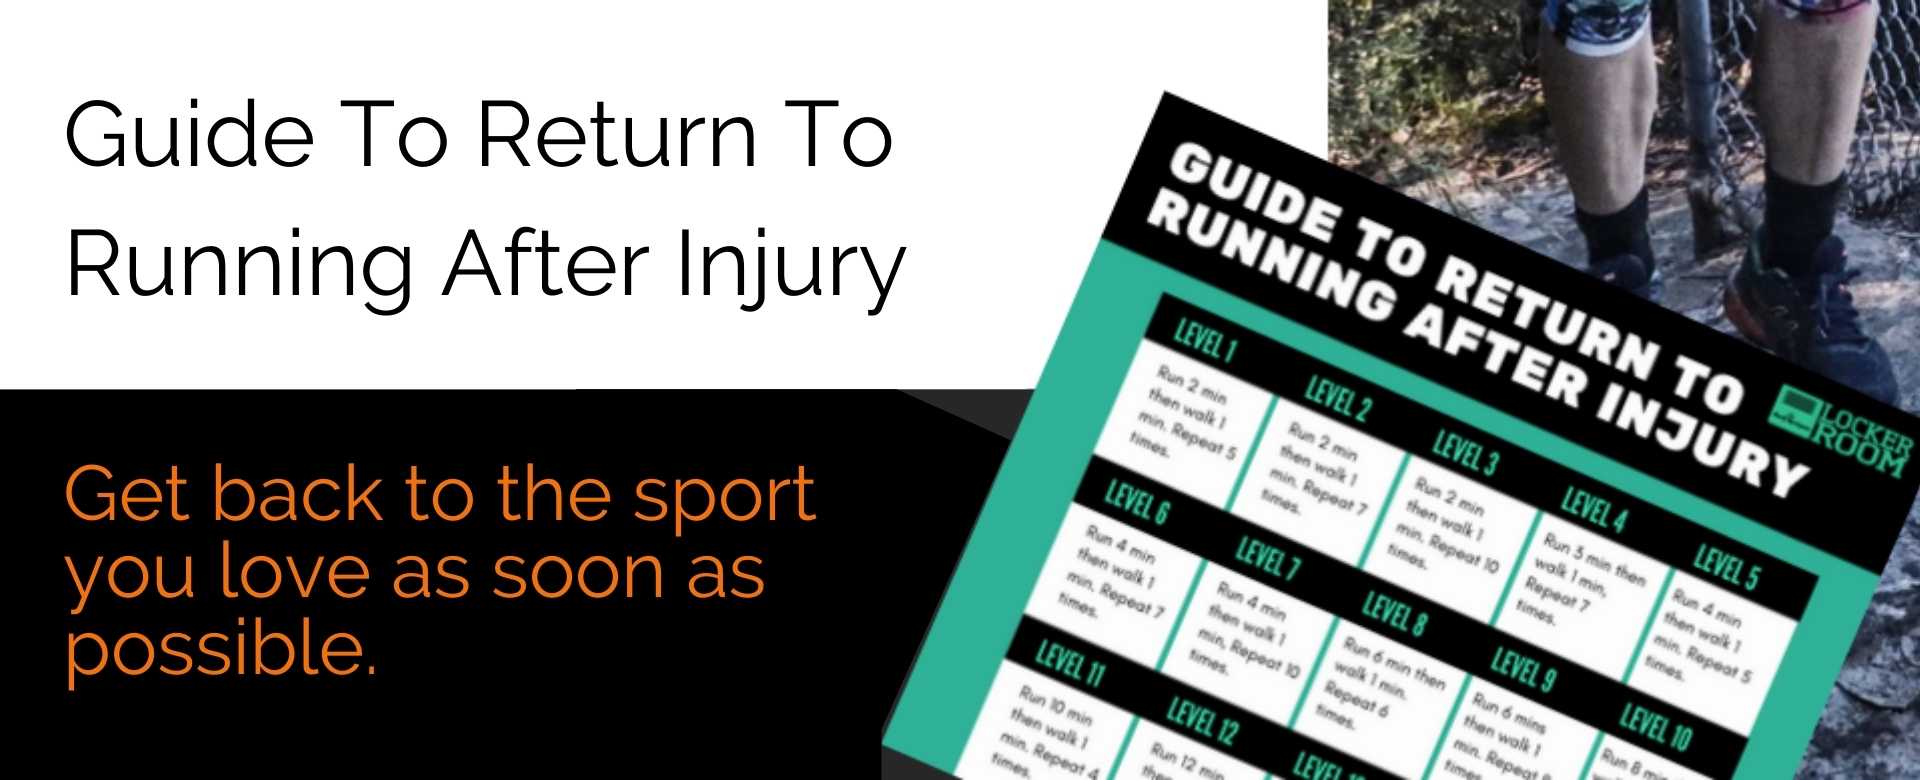 How To Return to Running After Injury - The Body Mechanic